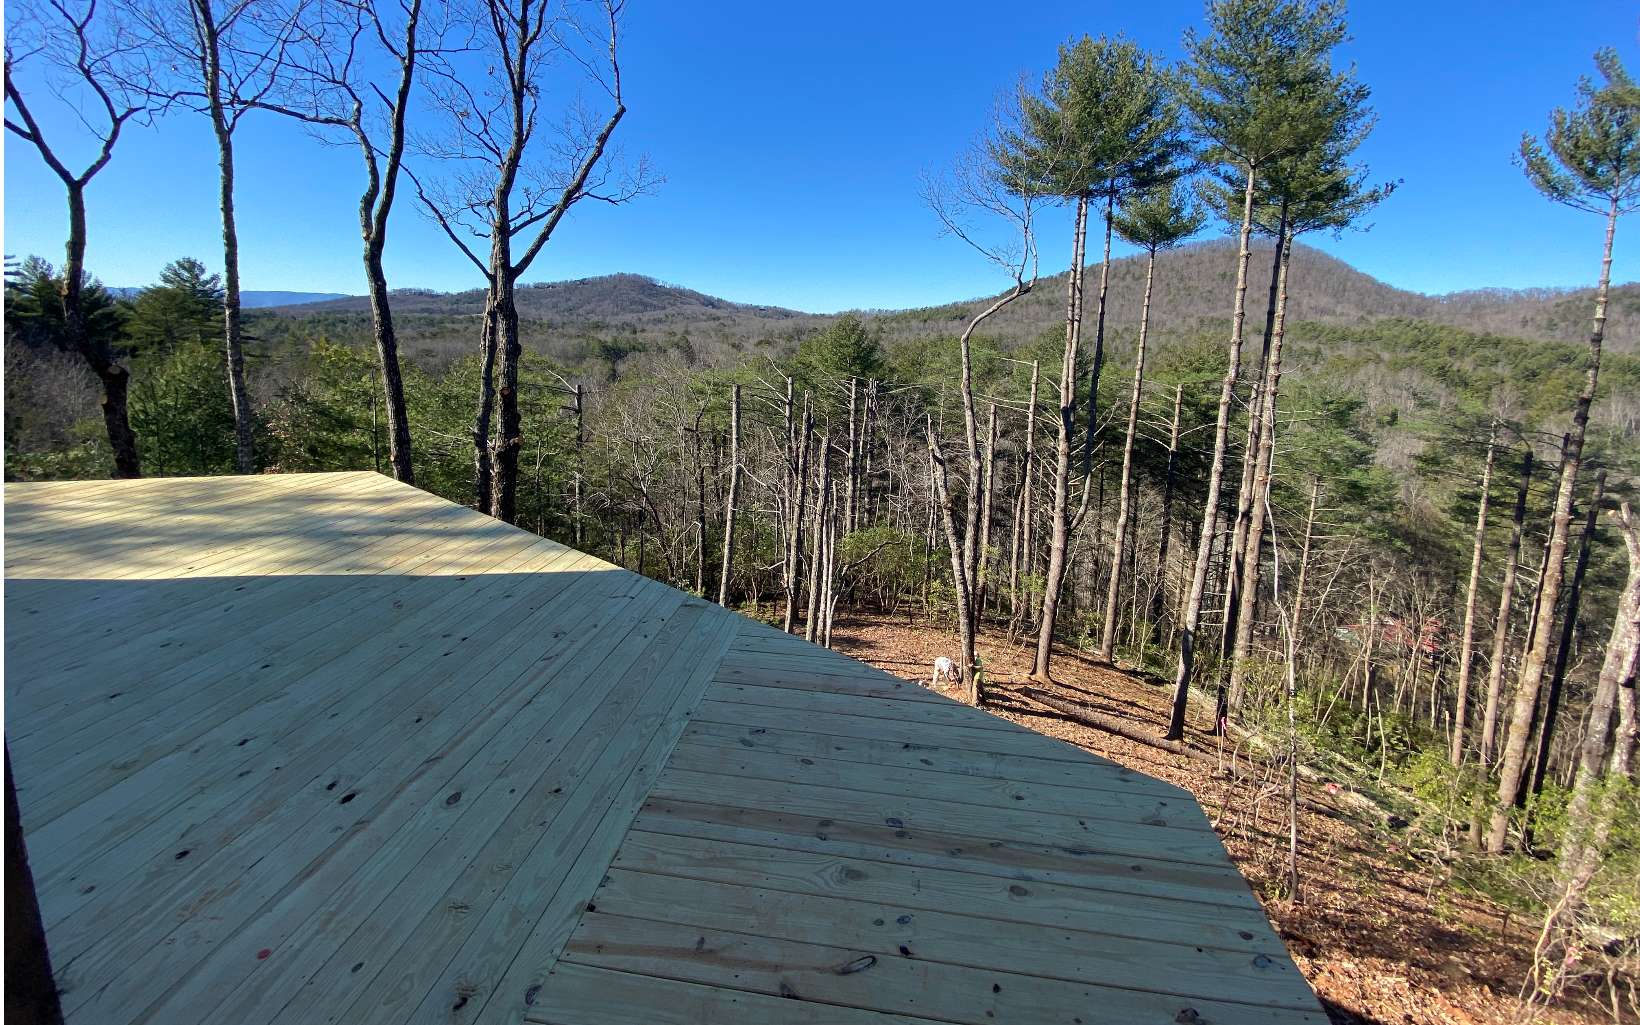 Spectacular "Long Range" Mtn. Views from Strawberry Ridge. "Vista Pruning" in process but it's already Awe-Inspiring. Prow-Front Cabin w GLASS WALLS opening up the Spacious Great Room. Wrap Around Porches & deck...Wood-Burning Fireplace on the Party Porch. Huge Great Rm w/Stone Fireplace & Kitchen Raised Counter bar (Ample Dining Area). Stained Trim, Ceramic Tile Bathrooms & ALL Wood Interior. Terrace Level Bonus "Family" Room w/Wetbar. A Bedroom & Full Bath on Each Level with Plenty of Storage. Only 3 residences in this Small Subdivision of Strawberry Ridge with a Shared Well & Shared Driveway. Only 2/10 mi from Hardscrabble (Paved County Rd). Quick access to NC & TN (white water rafting, Casino, etc). No Restriction against Short Term Rental.